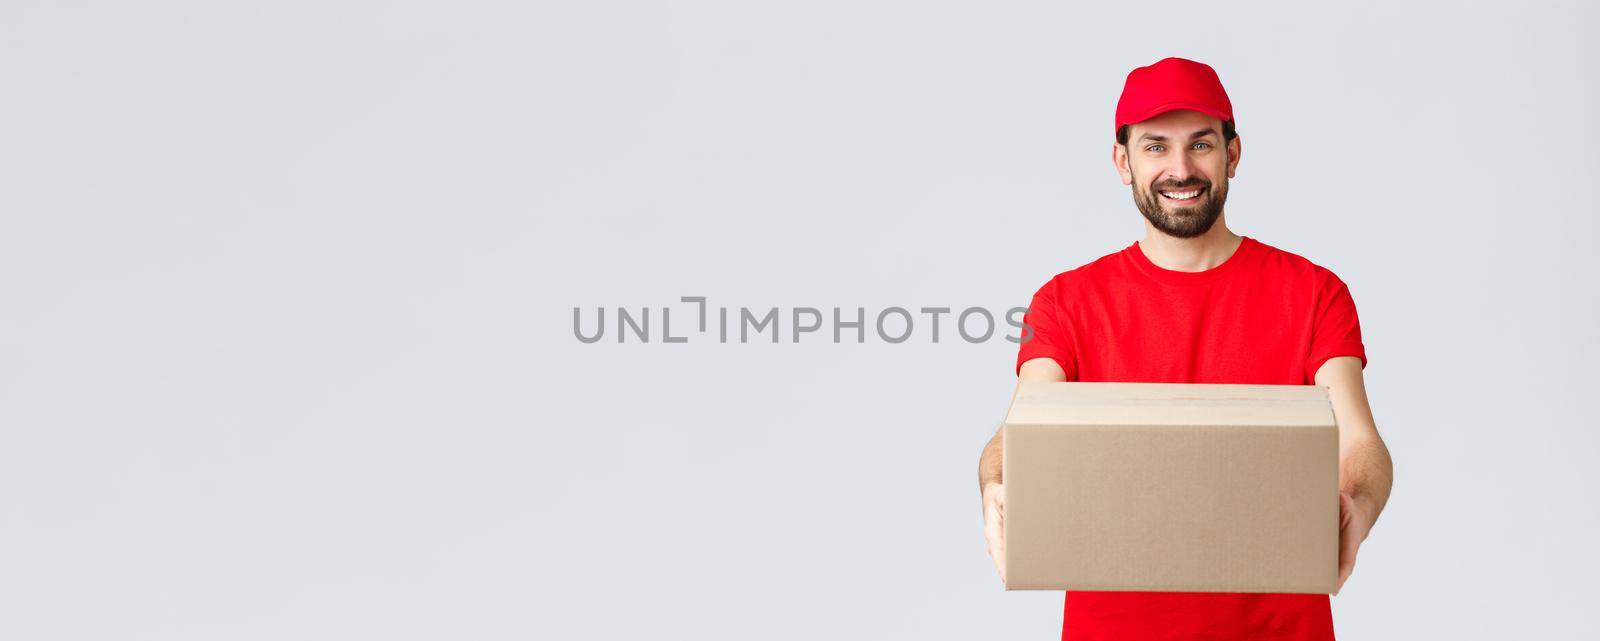 Order delivery, online shopping and package shipping concept. Friendly smiling bearded courier in red uniform t-shirt and cap, giving out package for customers, handing box to client.